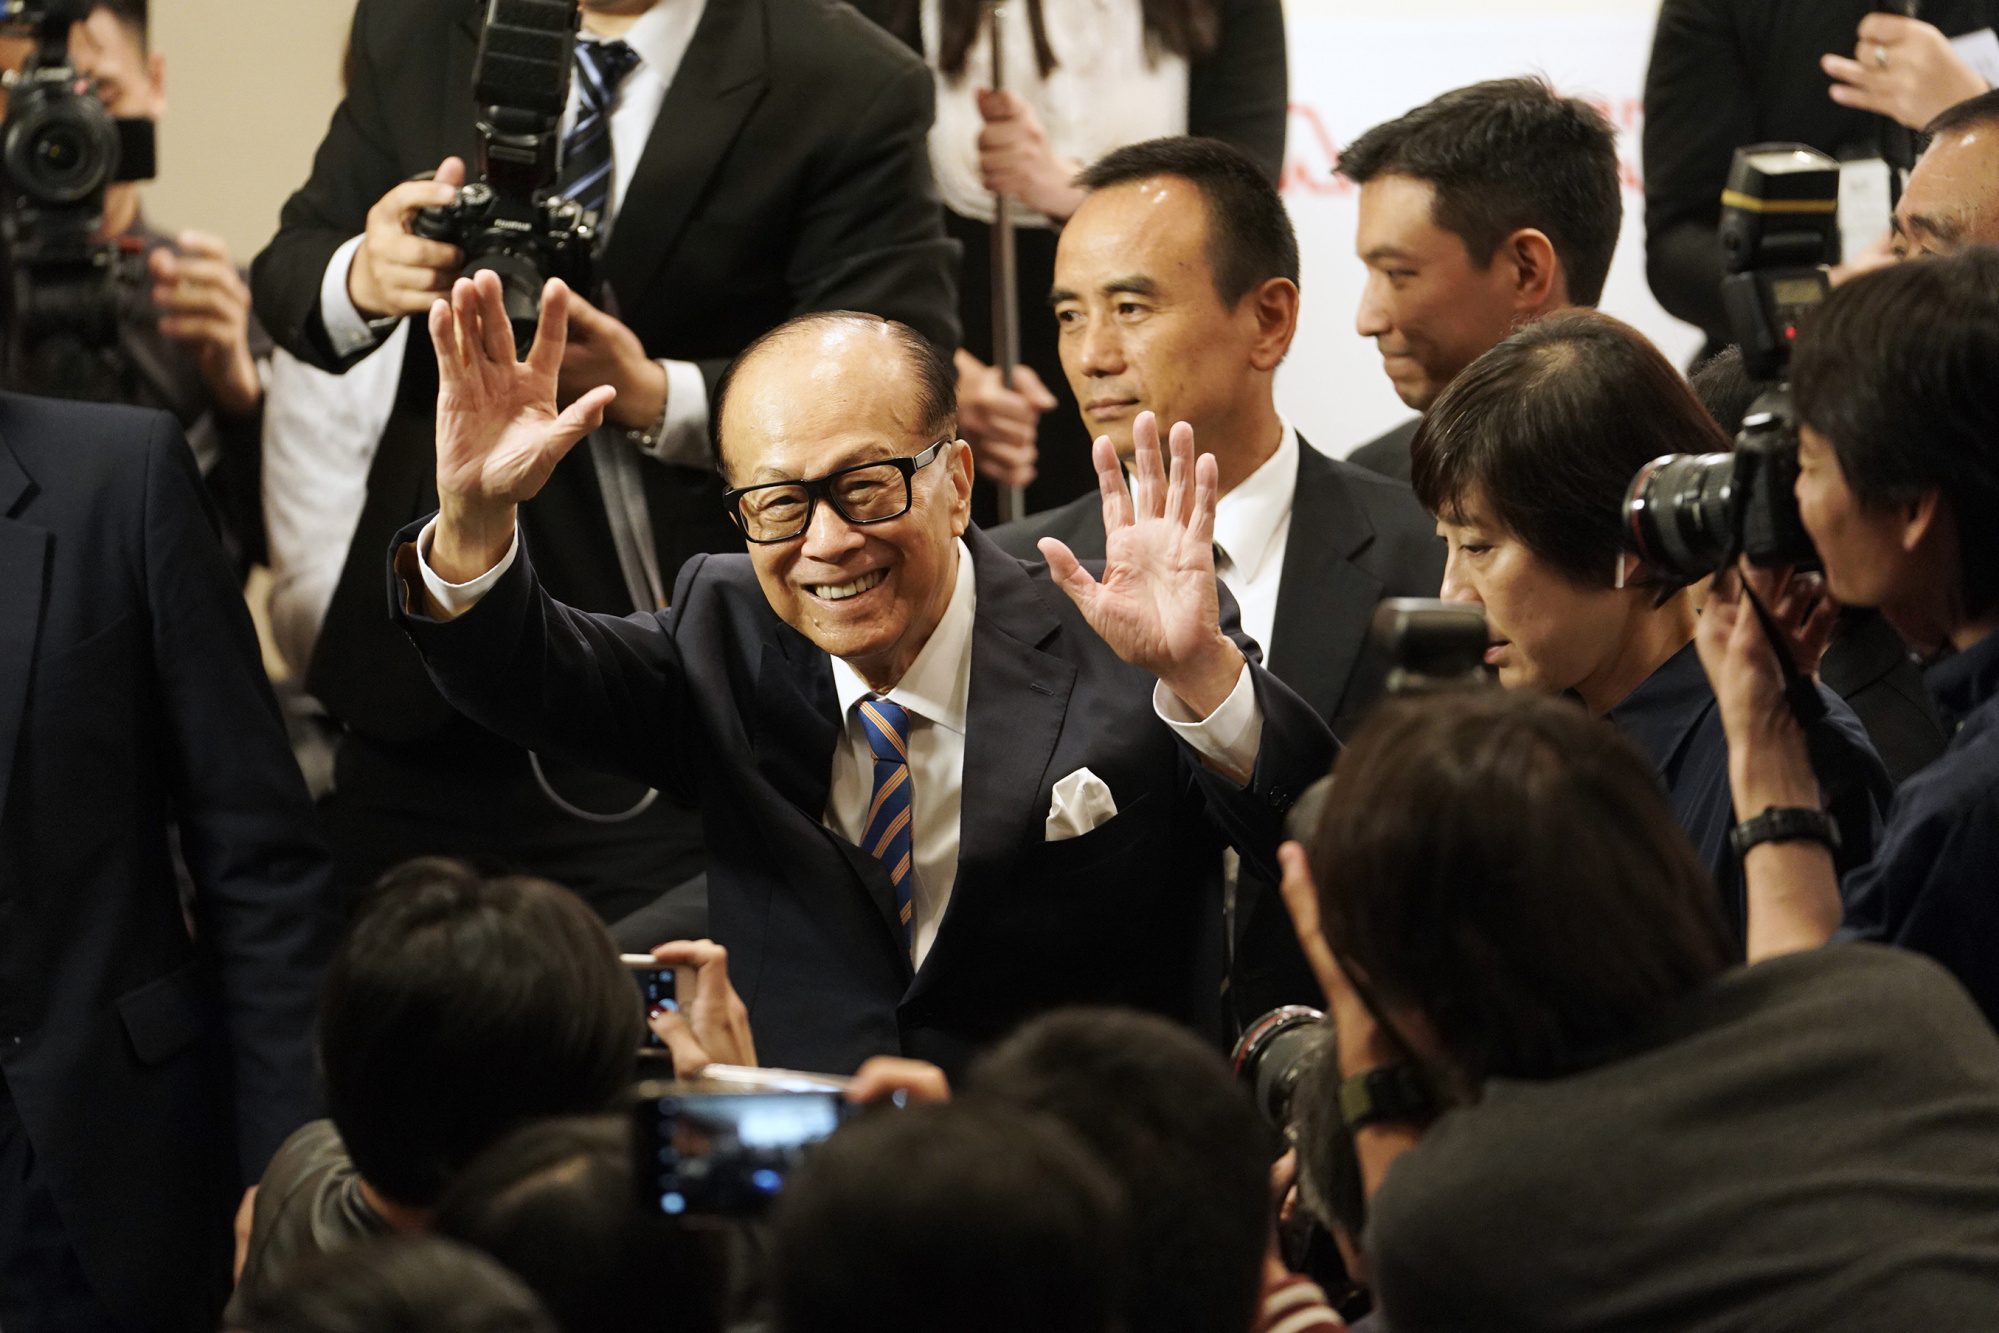 Zoom funding stemmed from Li Ka-shing’s disgust at costly video gear